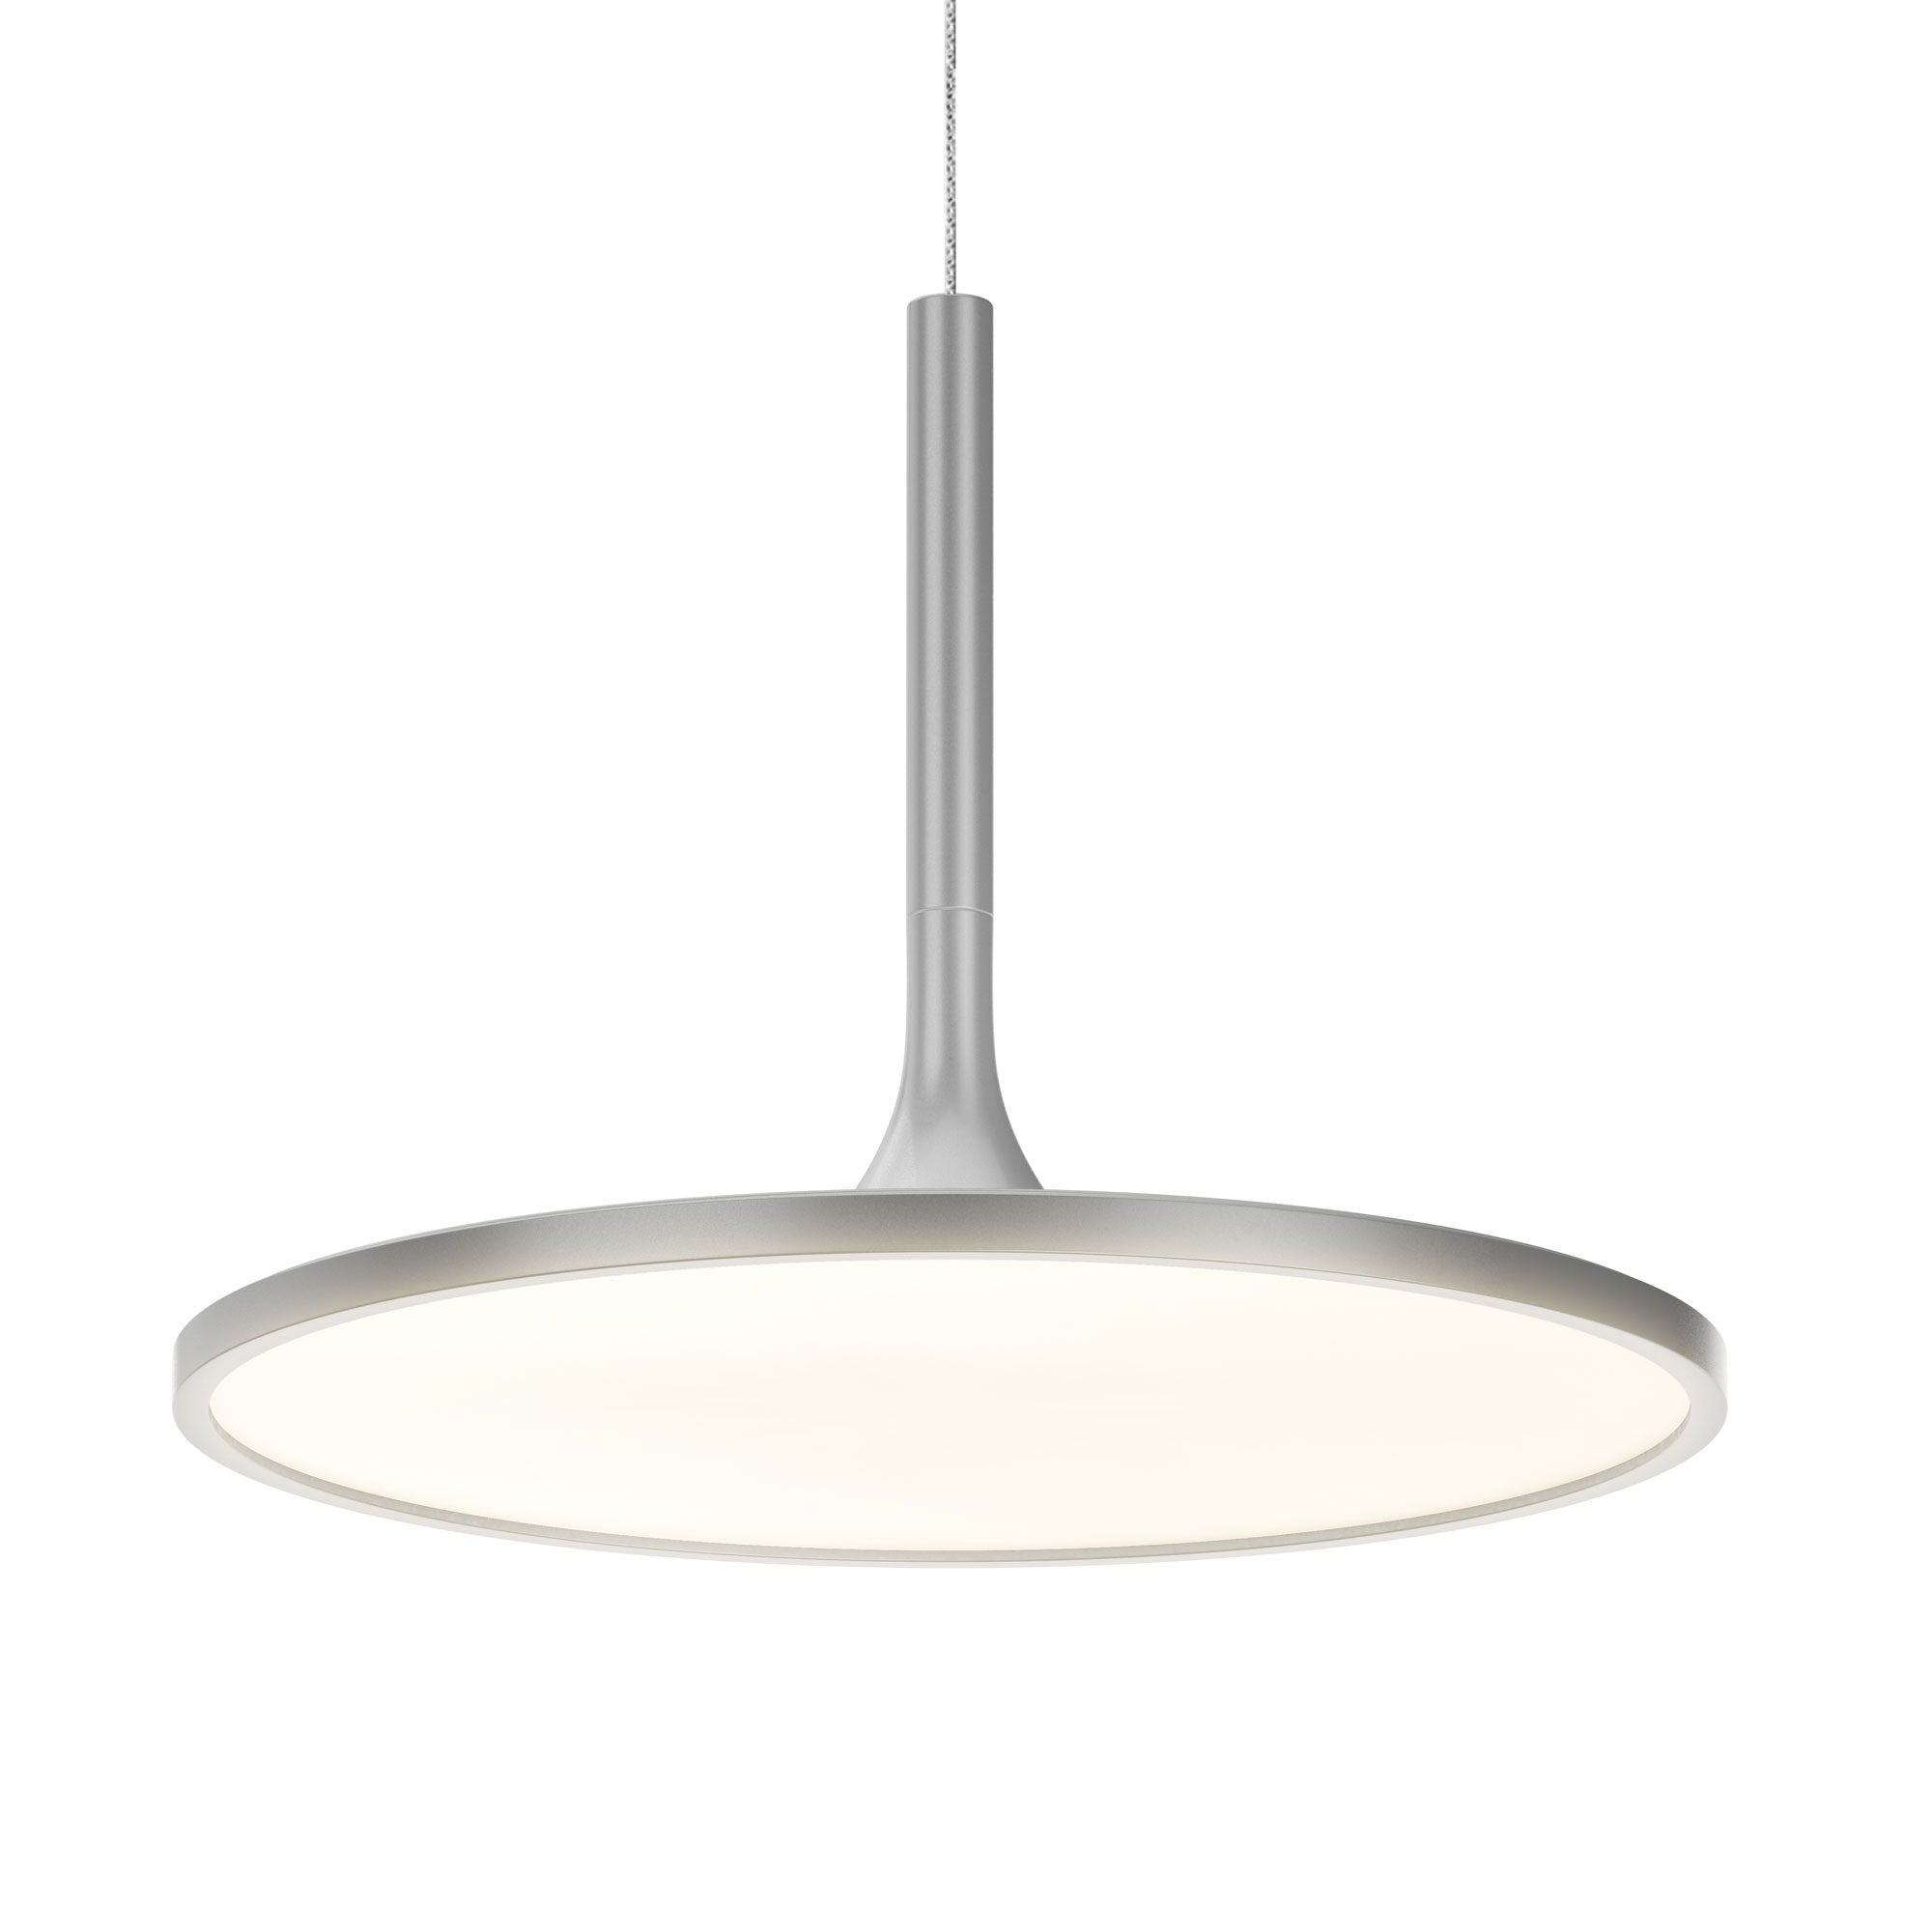 41W Round Plate Pendant Light, 3000K, 2225LM, Diameter 17.3" x 55"H, Dimmable, Home Office Lighting